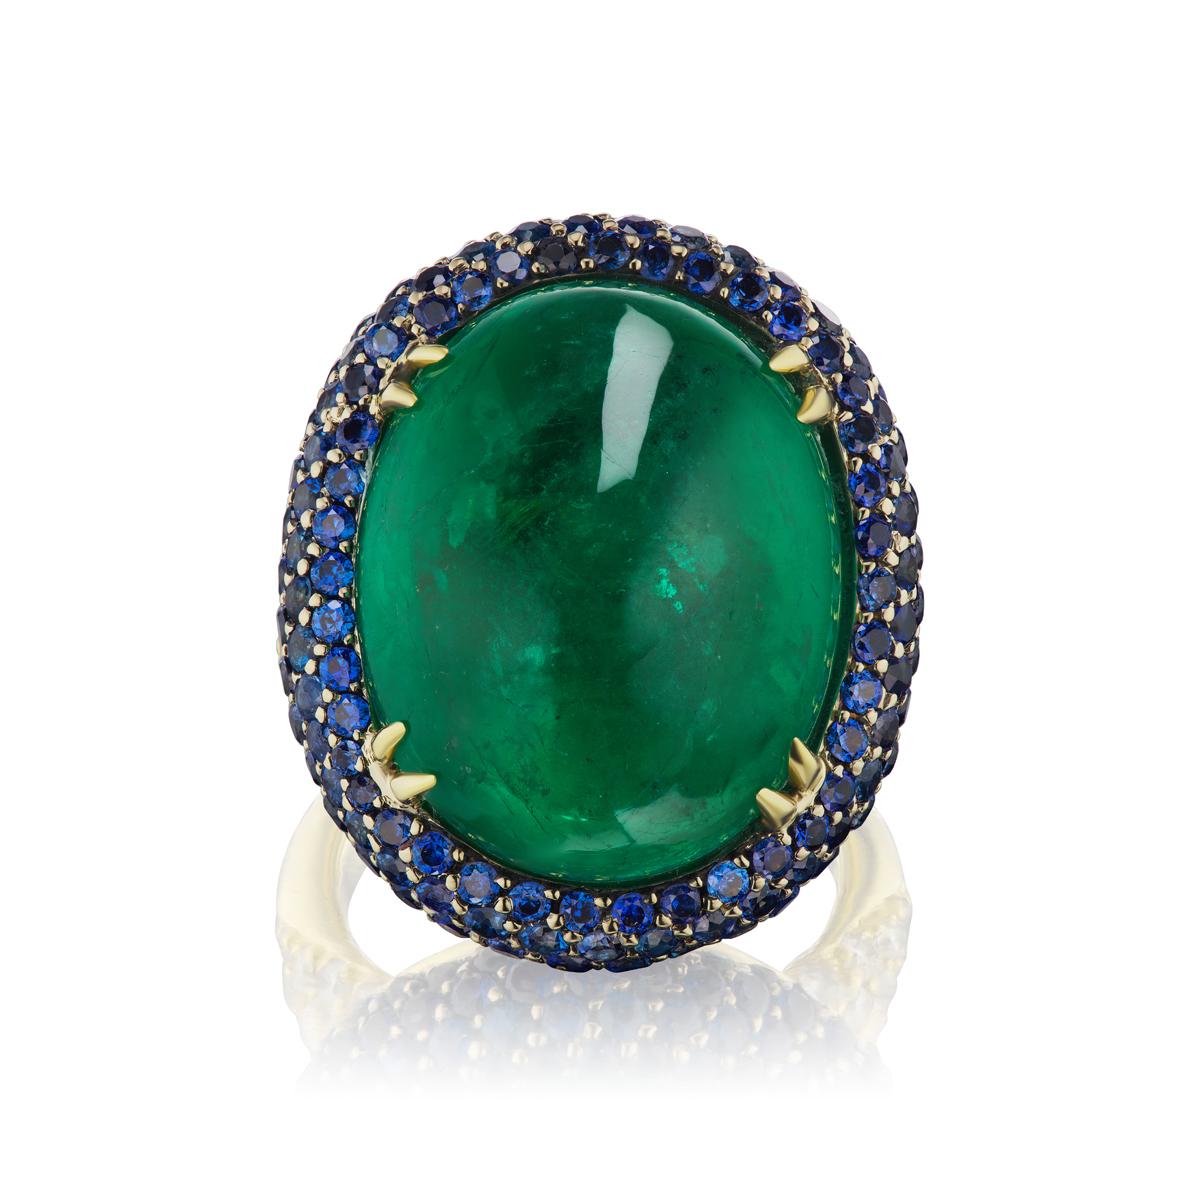 C.Dunaigre certified Brazilian emerald oval cabochon 27.06 cts mount in 18K yellow gold ring with royal blue Blue sapphire and E/VVs diamonds. sapphire is 3.80 cts and diamond is 0.90 cts..
